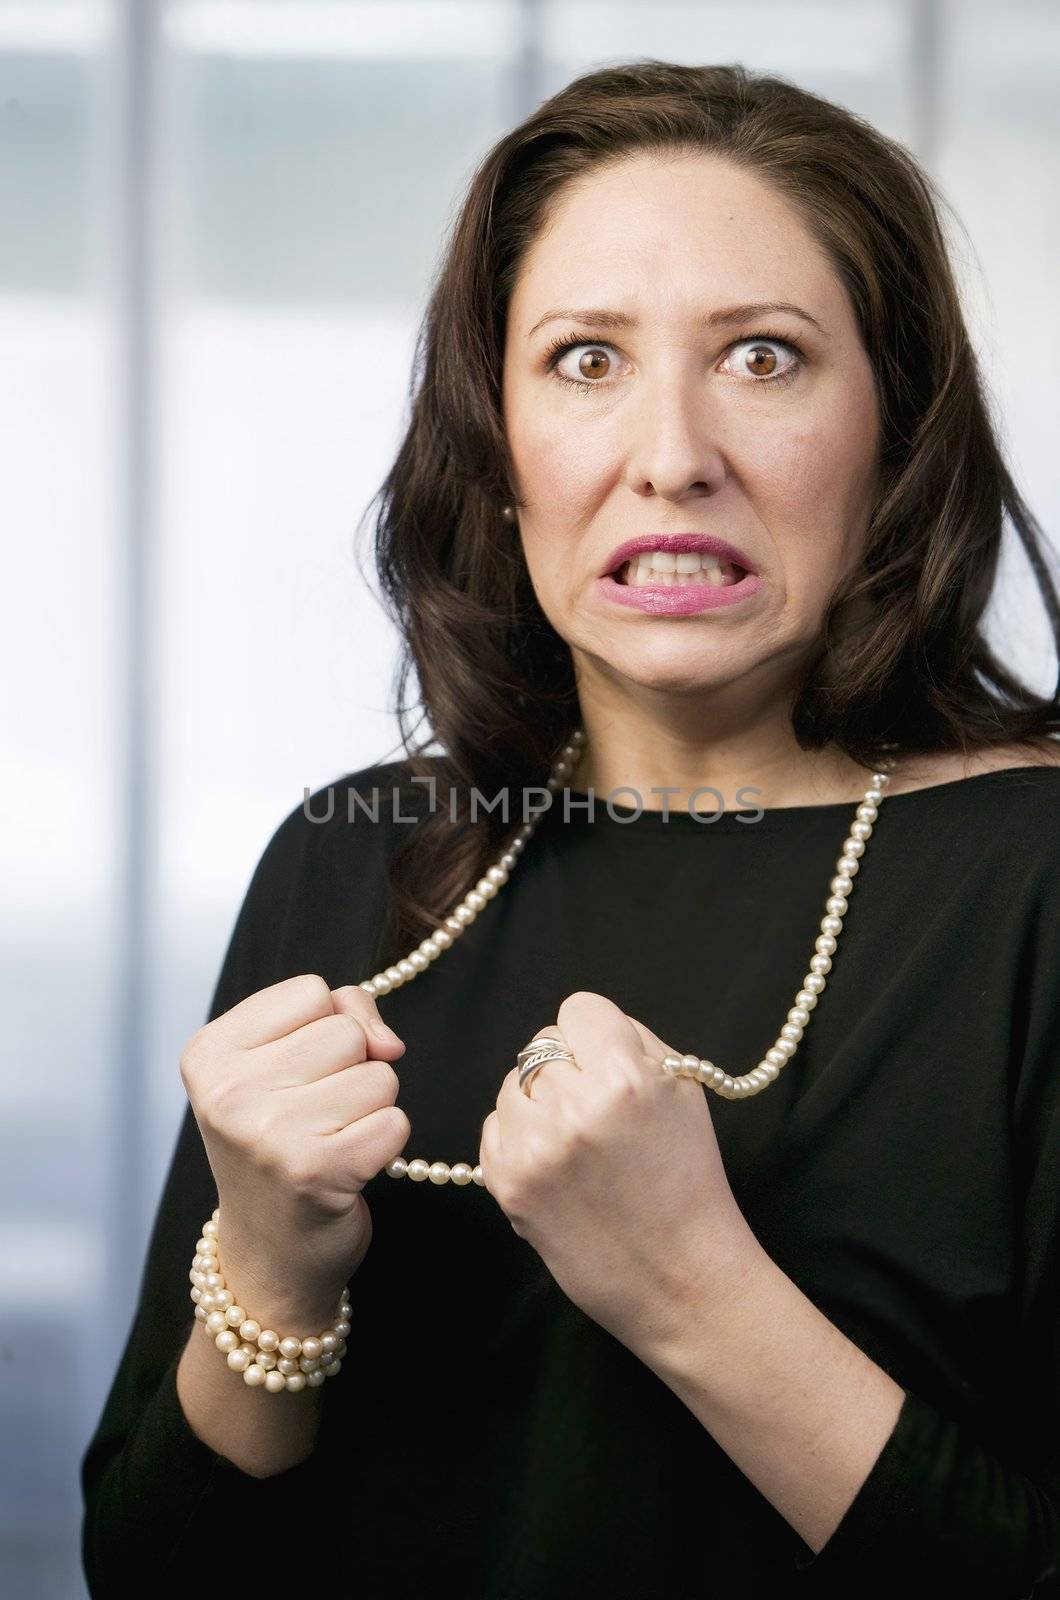 Frustrated Hispanic Woman Pulling on Her Necklace